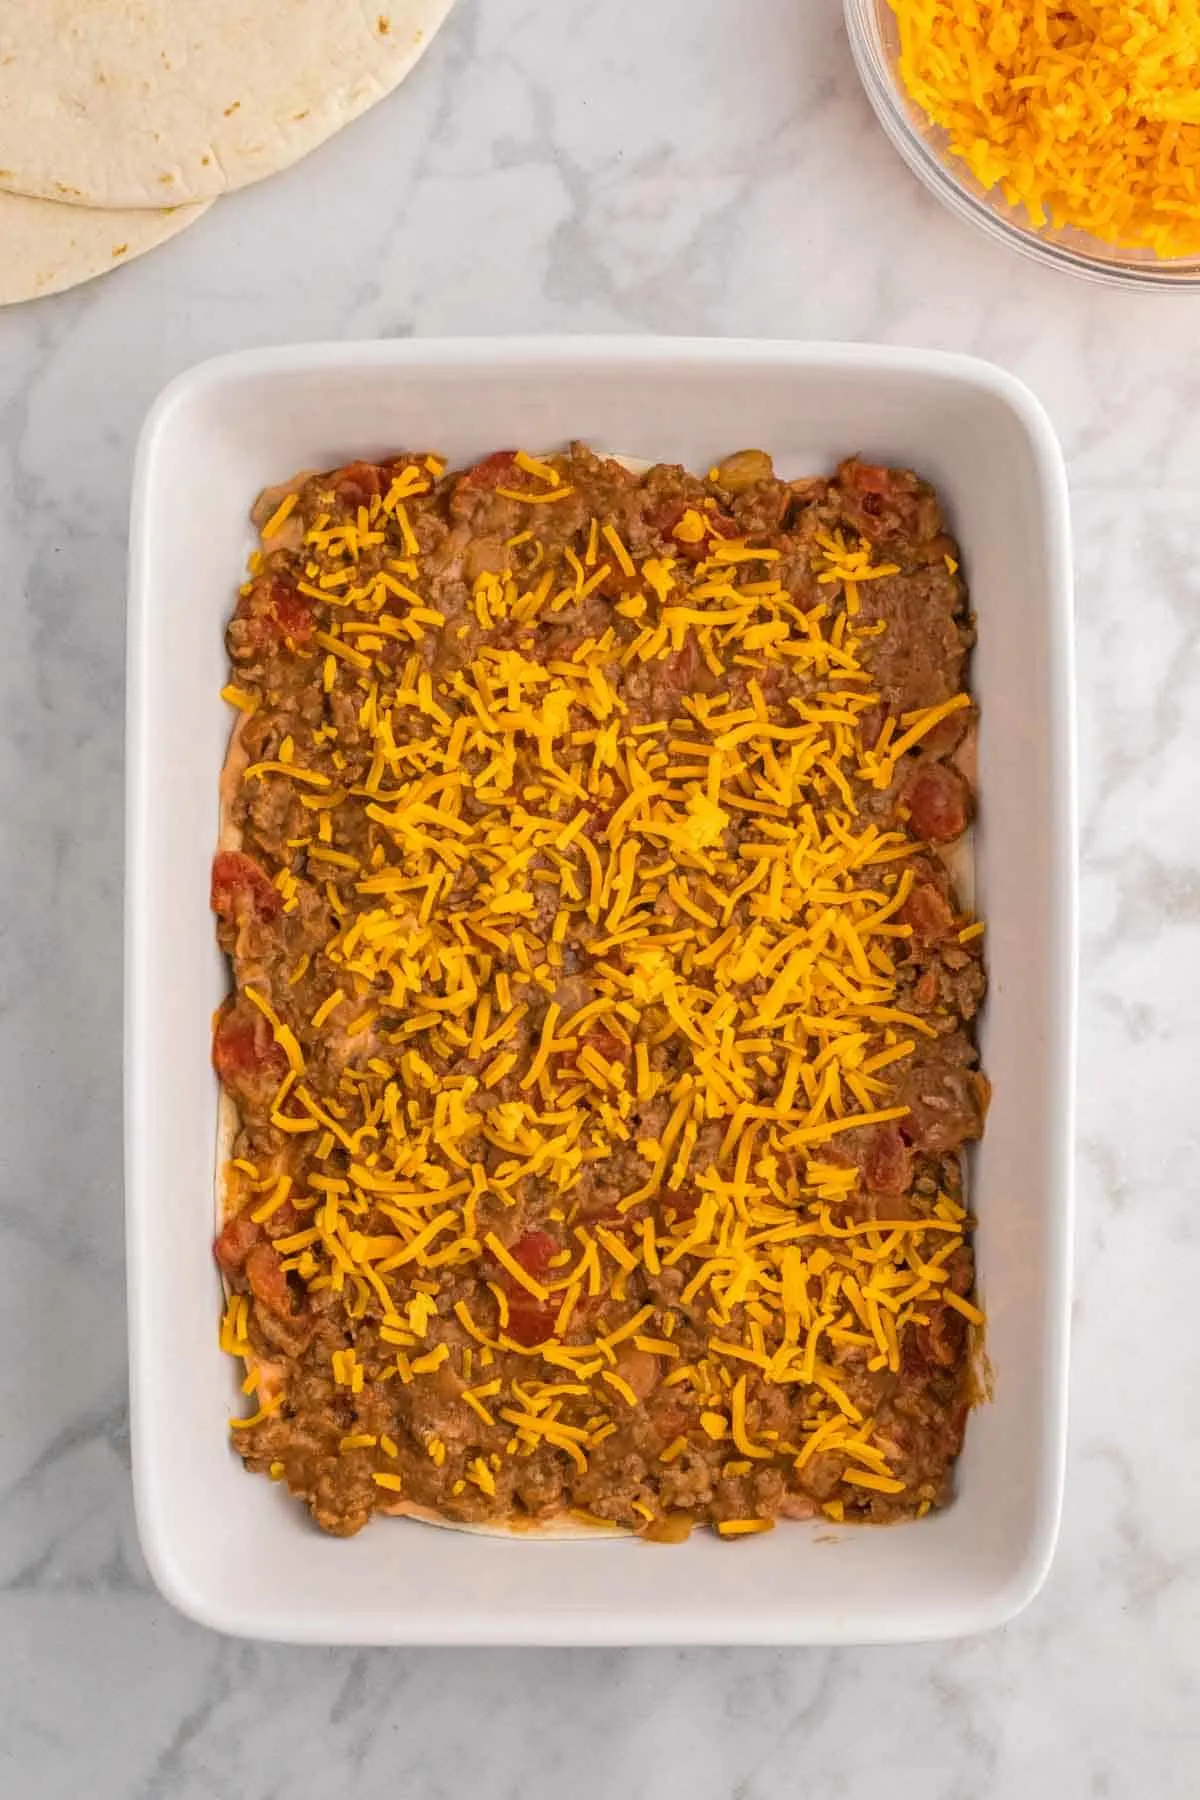 shredded cheddar cheese sprinkled over beef burrito mixture in a baking dish